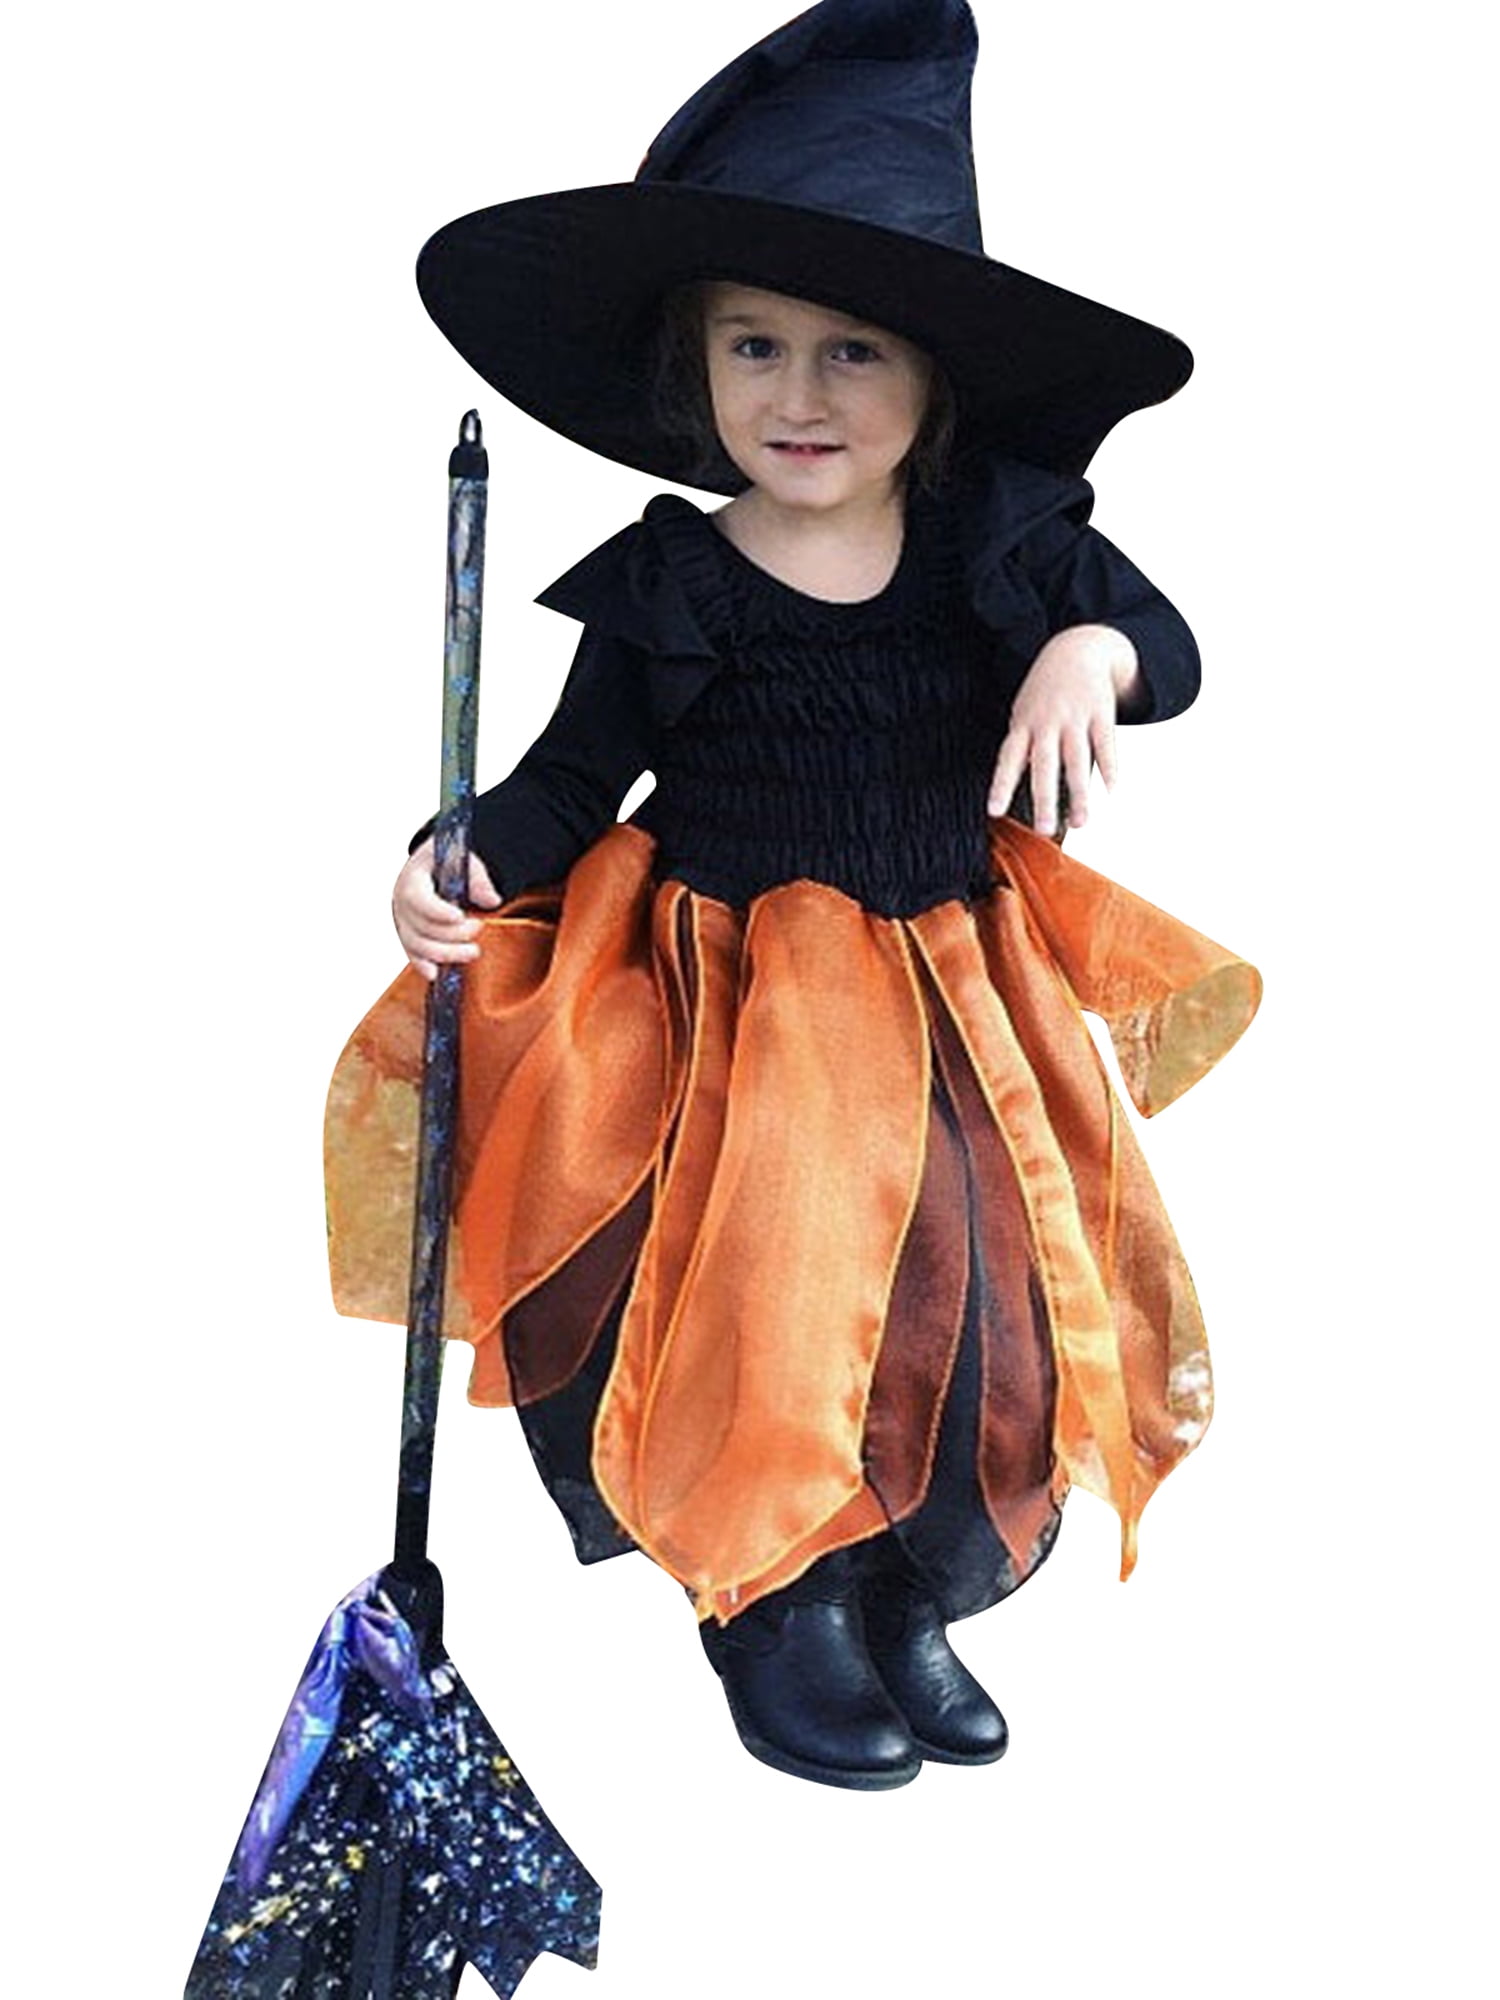 Toddler Kids Baby Girls Halloween Costume Witch Clothes Party Dresses+Hat Outfit